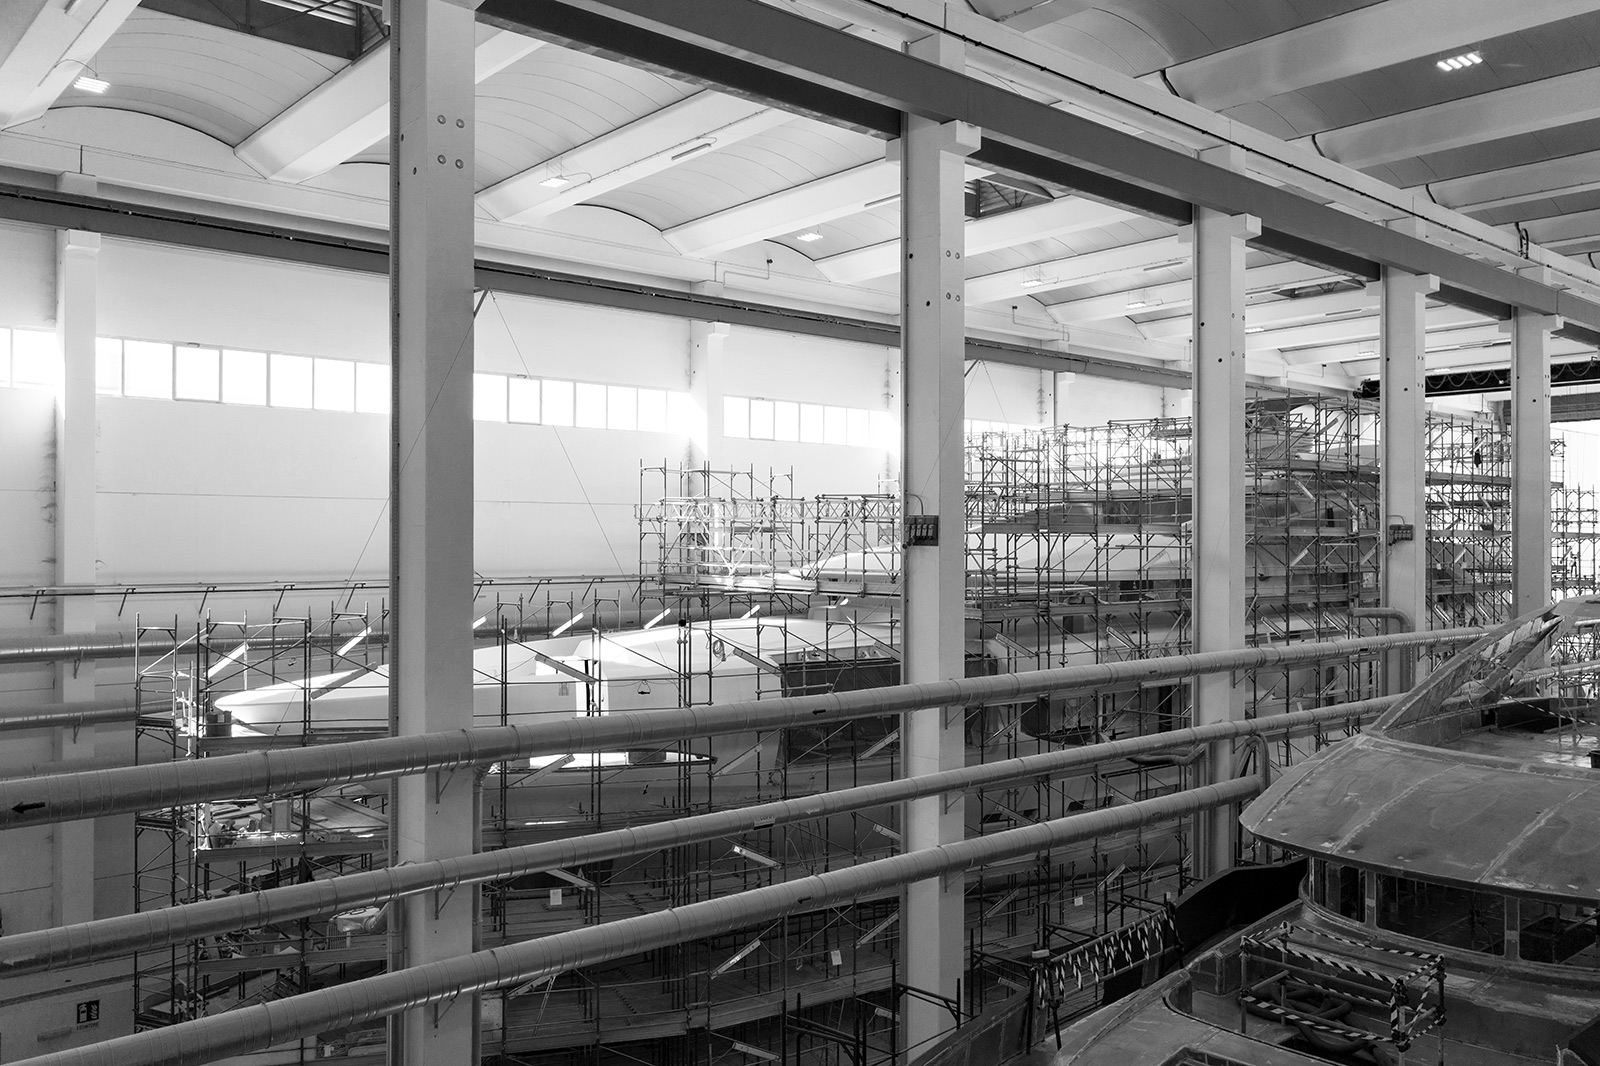 Palumbo yachts facility where vessels are under construction